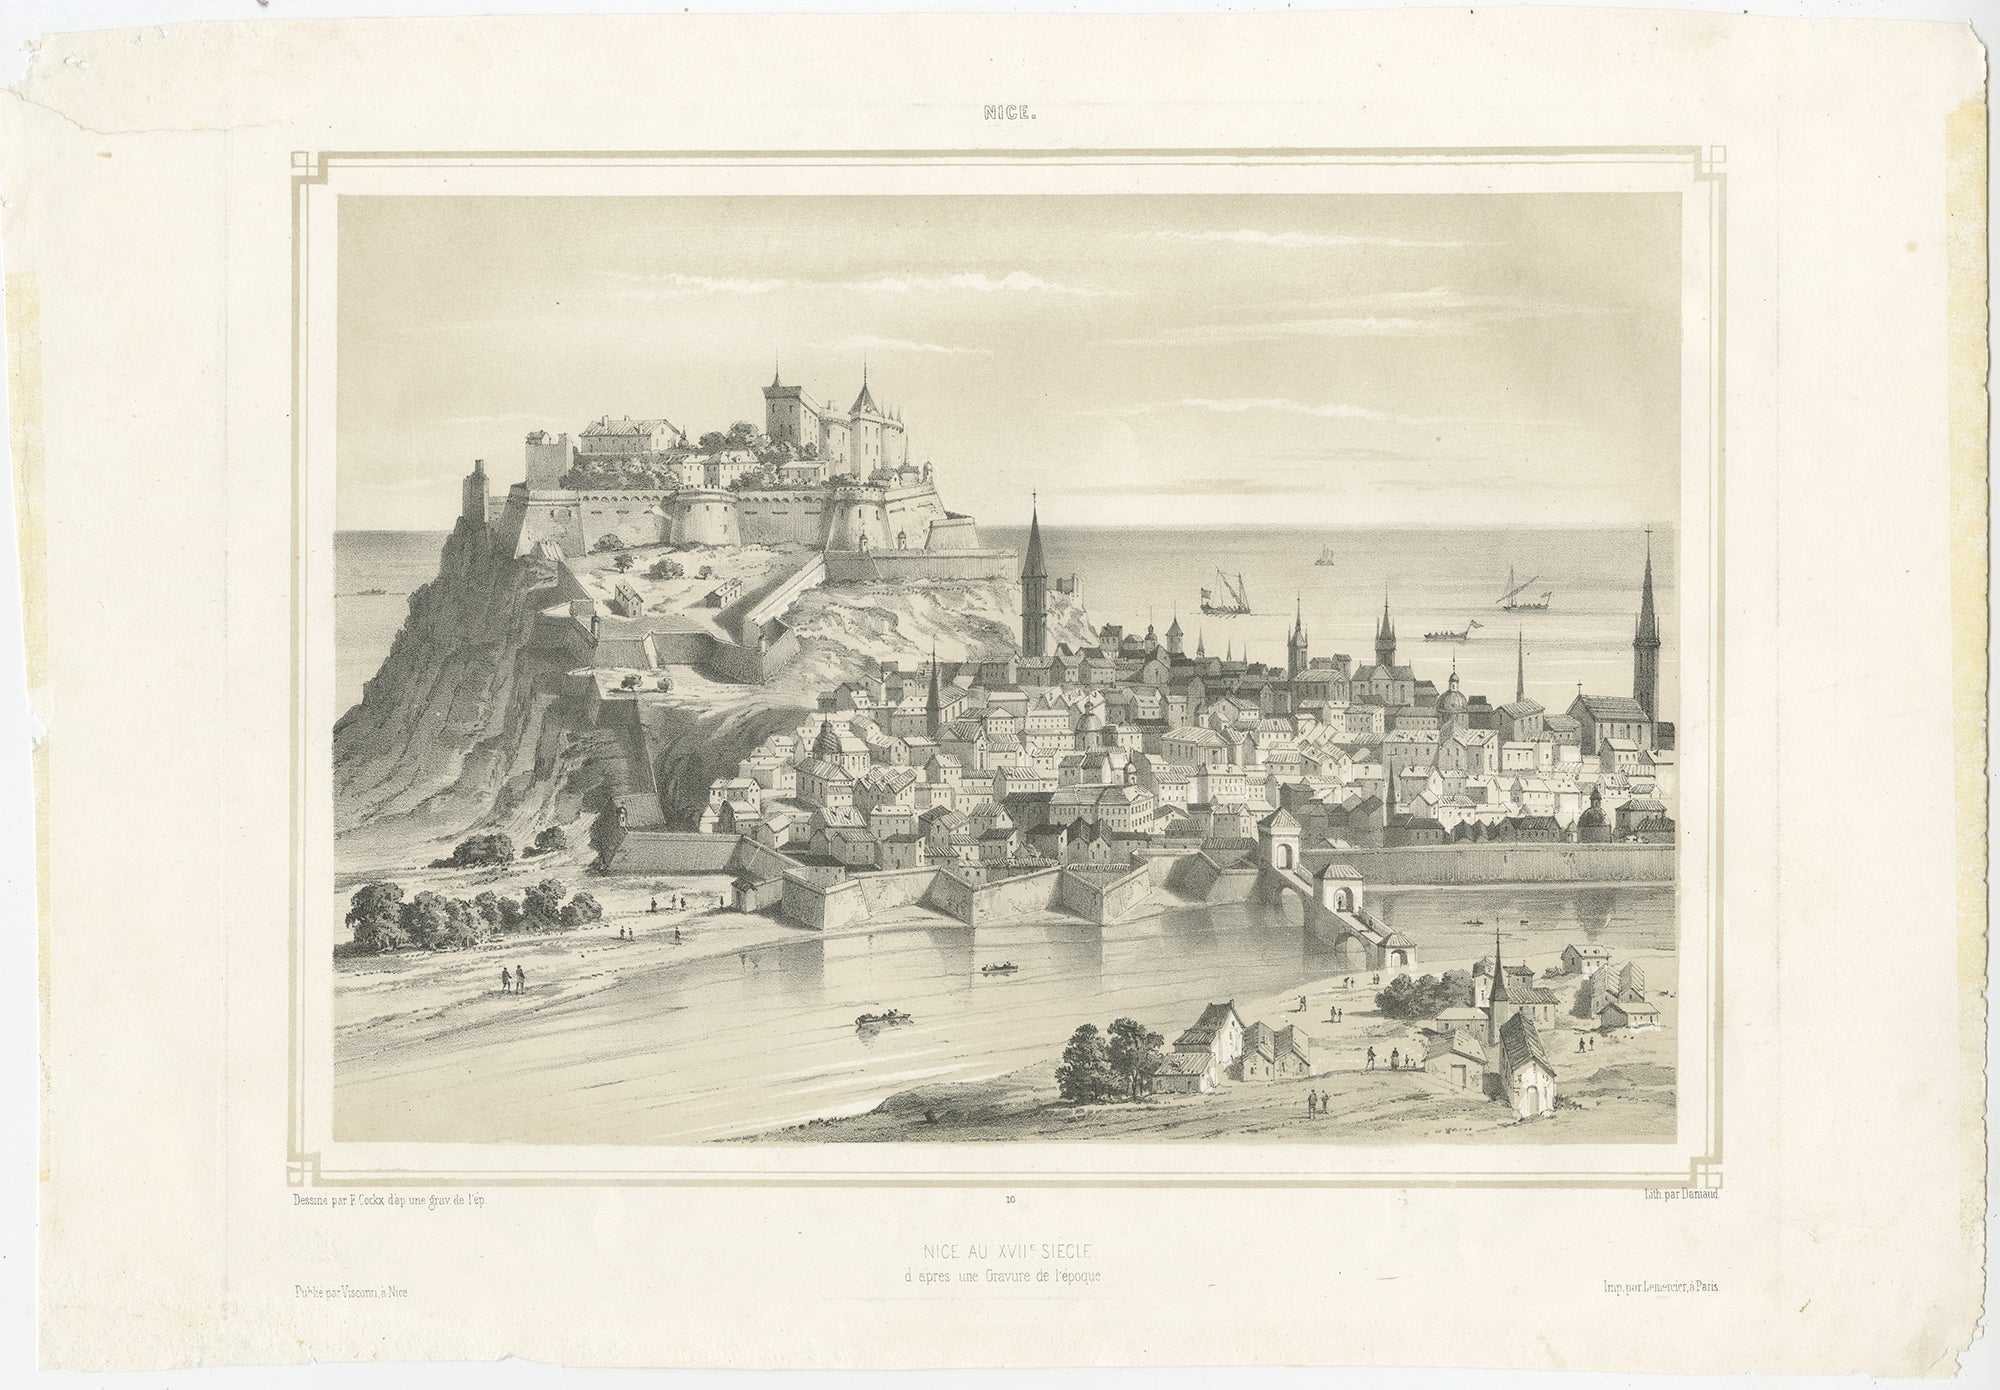 Antique print titled 'Nice au XVIIe Siecle d'apres une Gravure de l'Epoque'. Original antique print of the city of Nice, France. This print originates from the series 'Nice et ses environs', published 1855.

Artists and Engravers: Published by